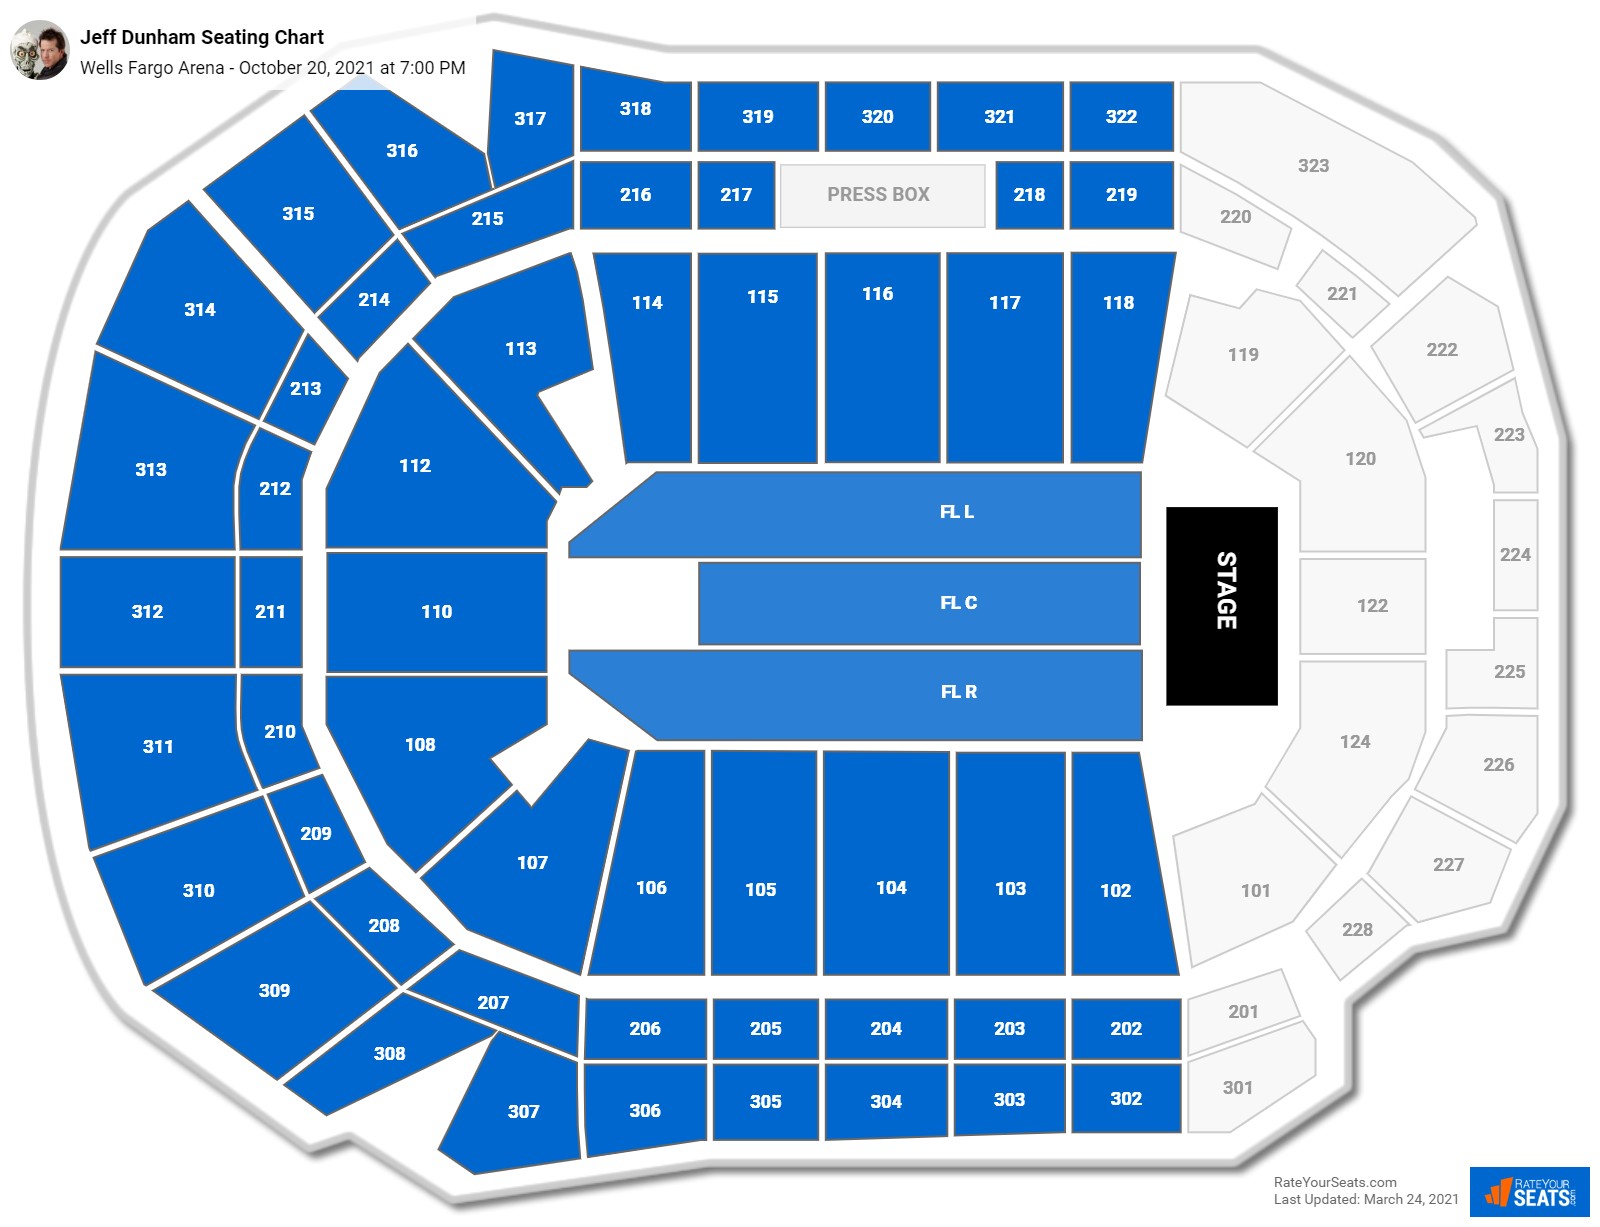 Wells Fargo Arena Seating Charts for Concerts